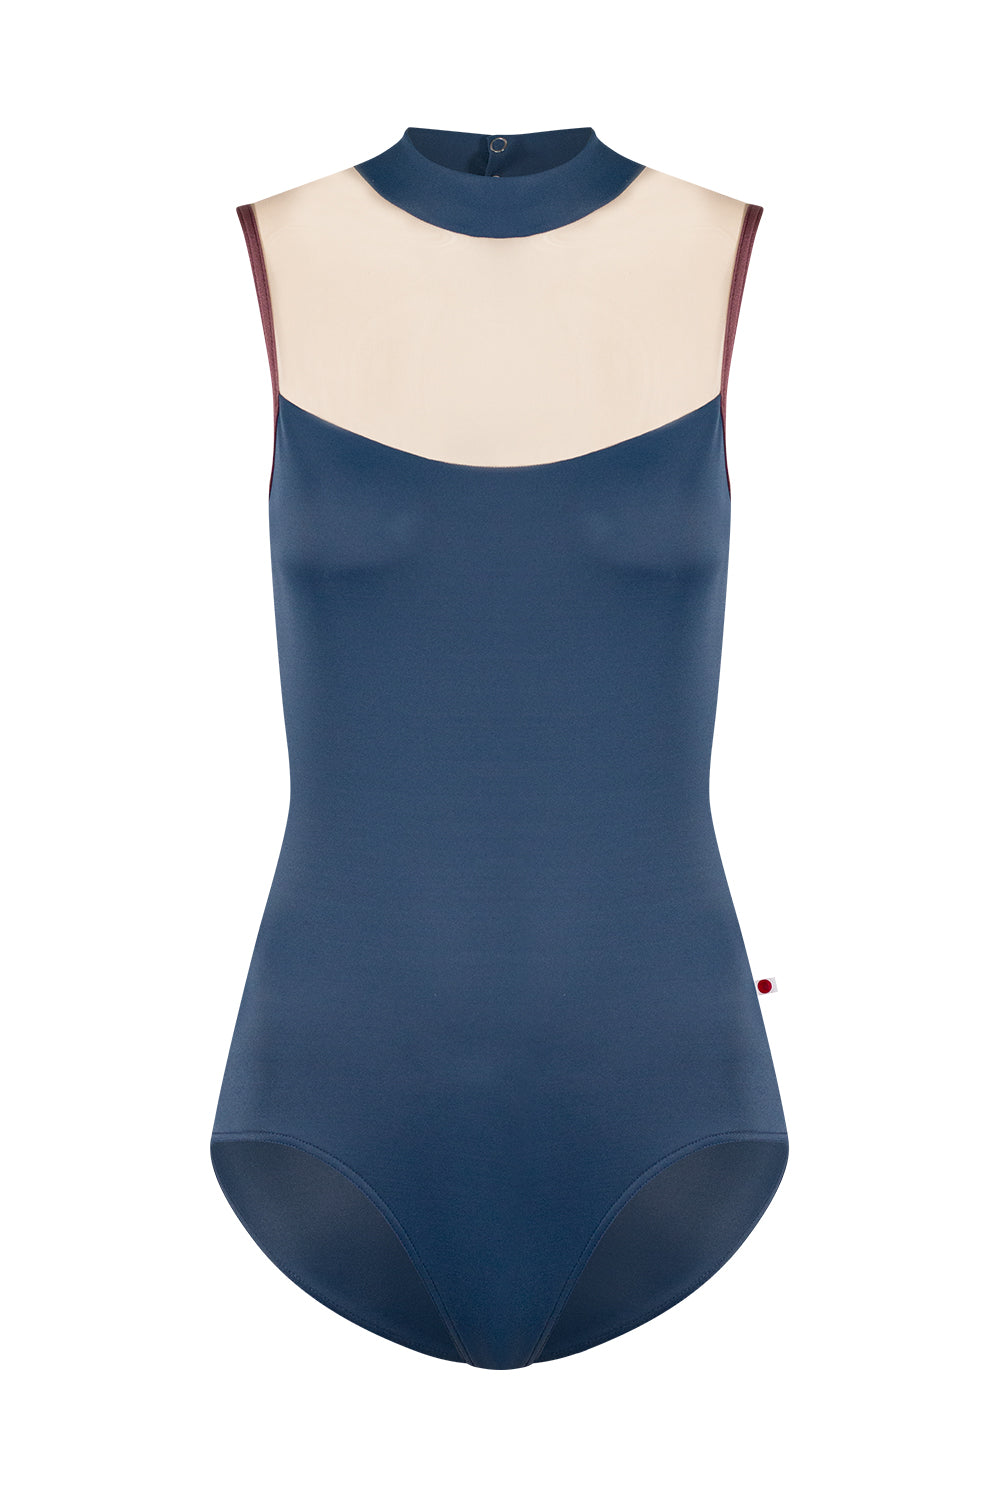 Camila leotard in T-Storm body color with Mesh Dolce top color and N-Phoenix trim color